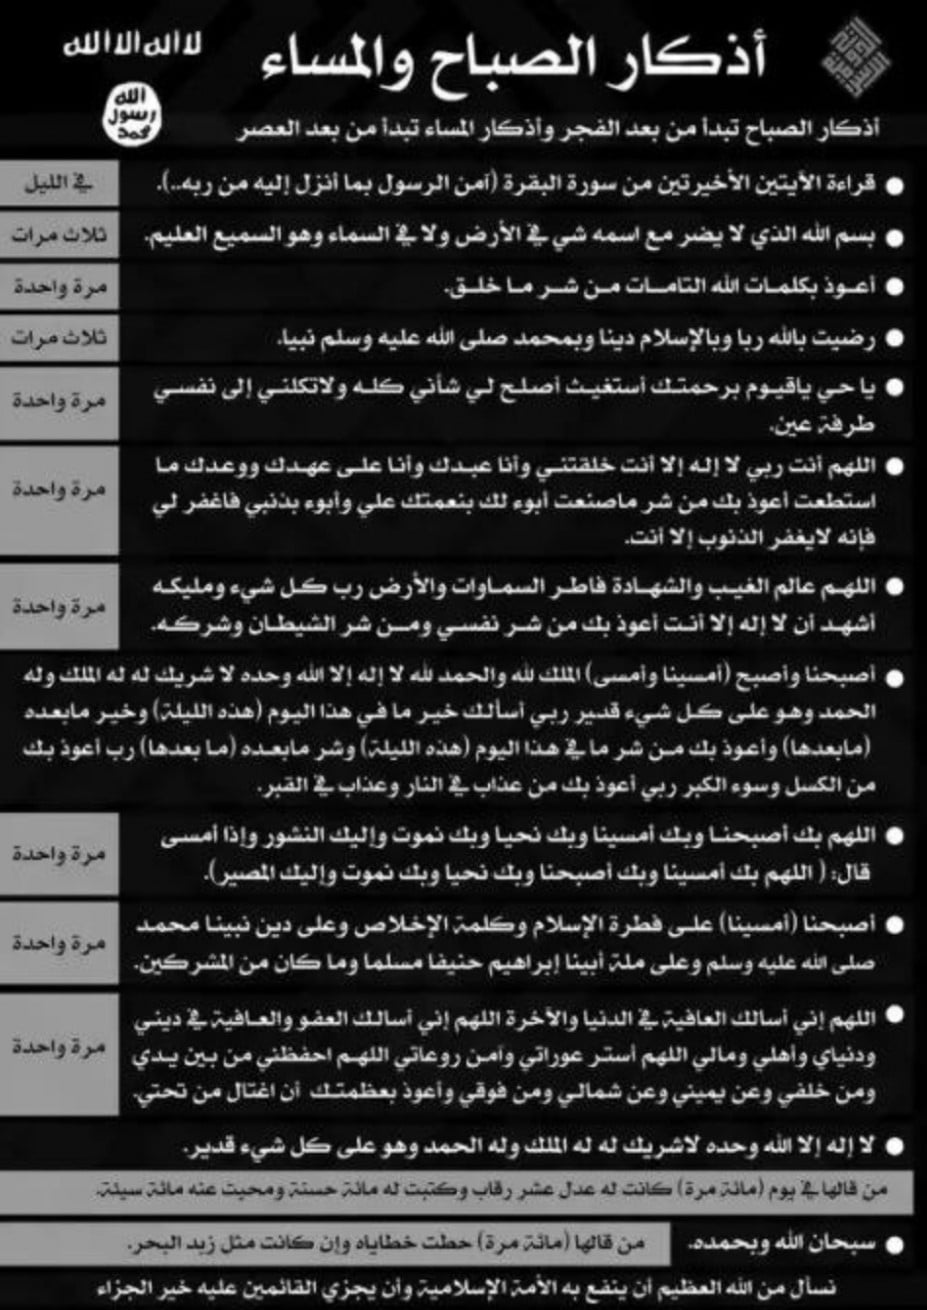 (Poster) Islamic State Supporters Circulate Condoned Prayers - 24 March 2022